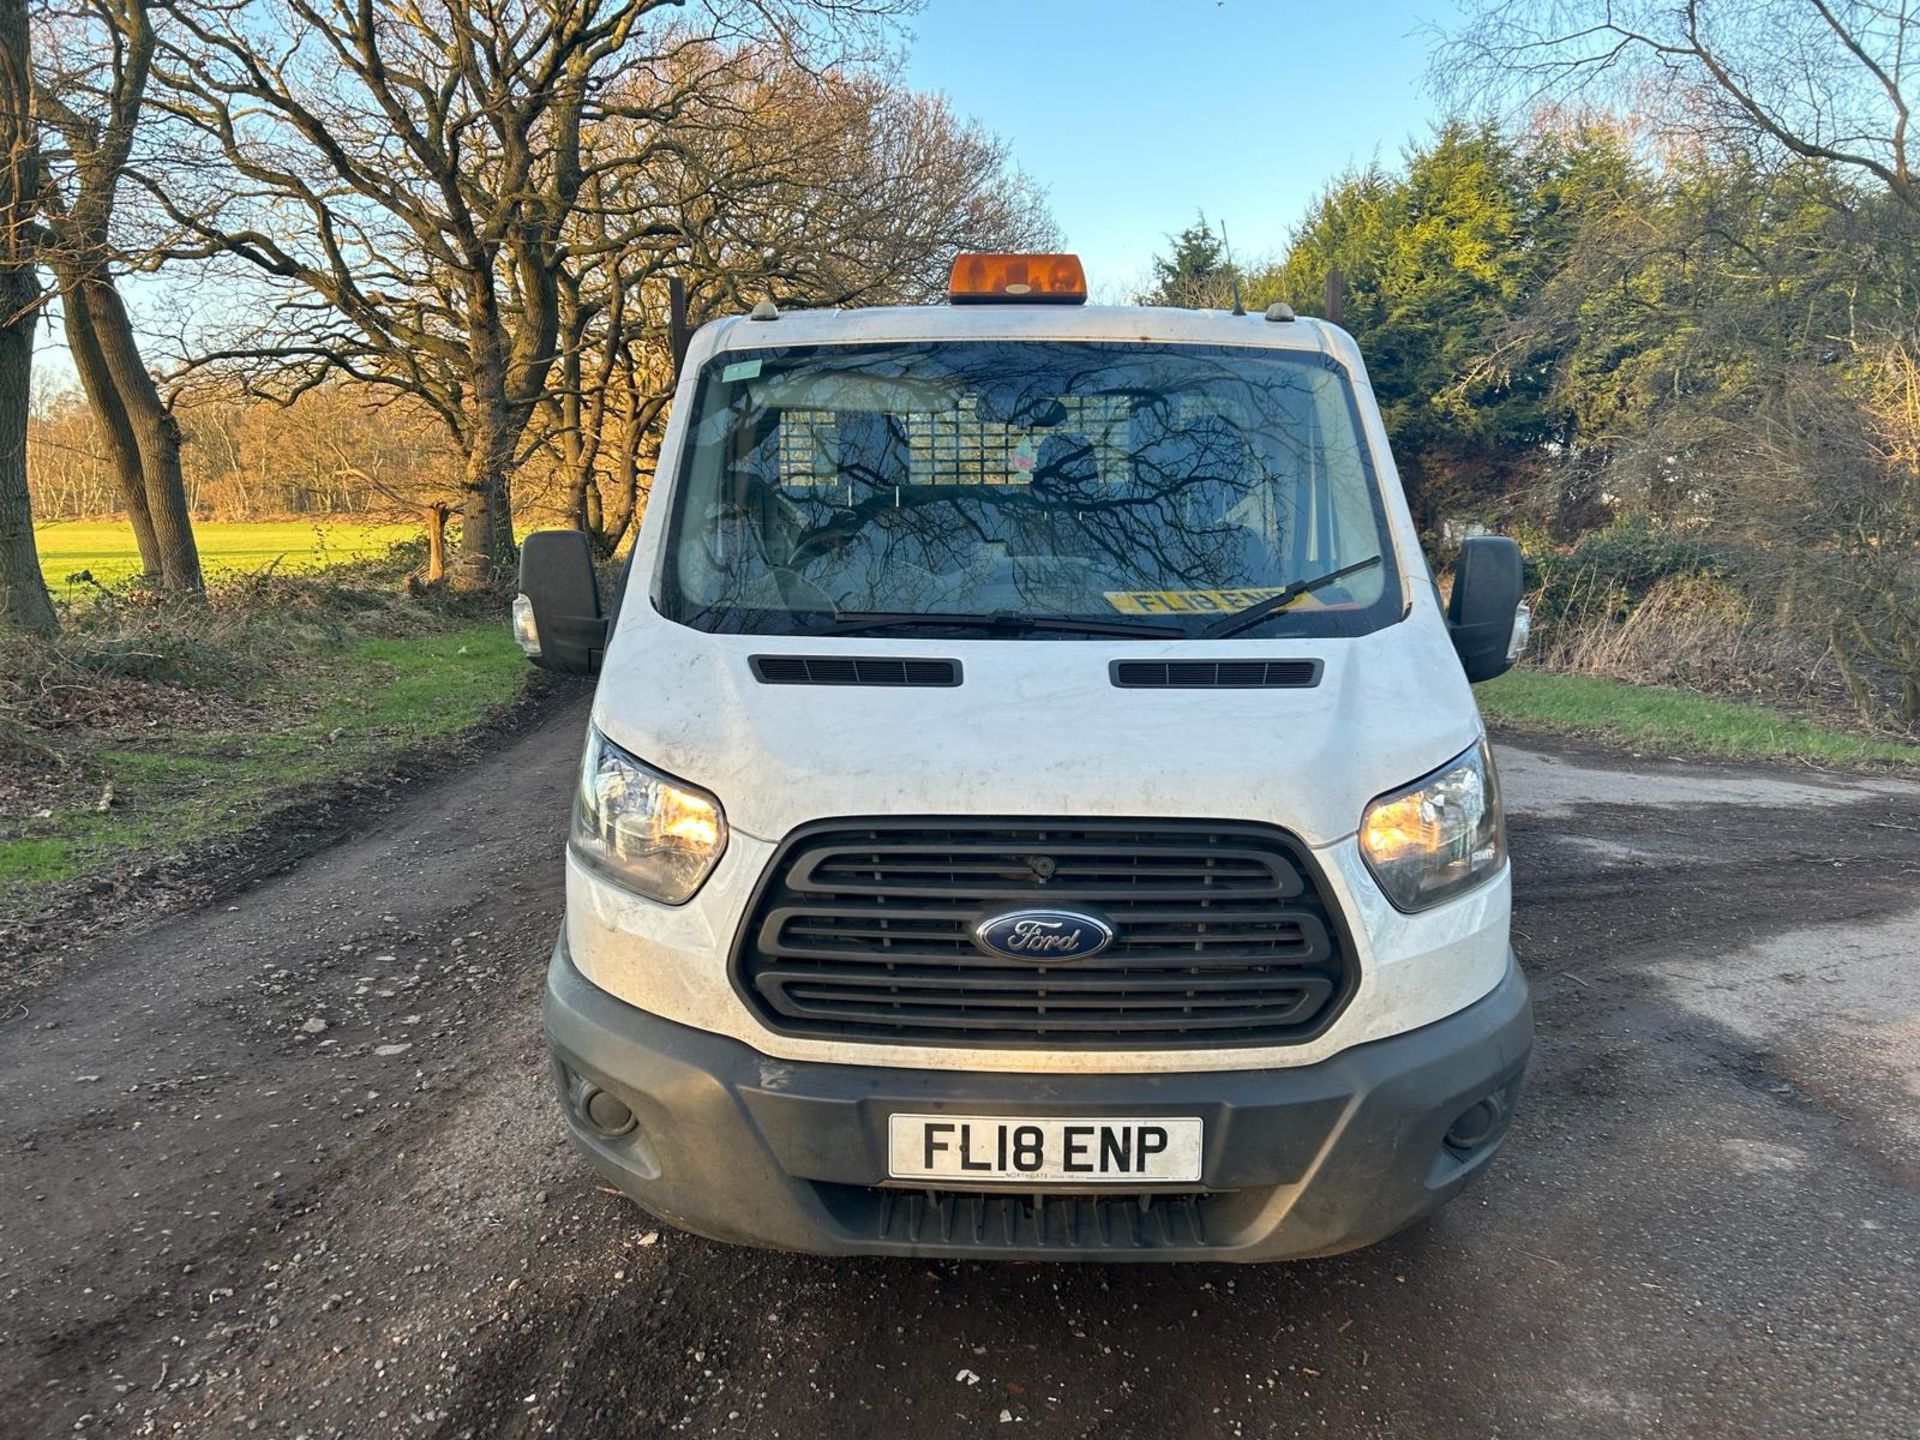 2018 18 FORD TRANSIT TIPPER - 135K MILES - EURO 6 - TWIN REAR WHEEL. - Image 2 of 13